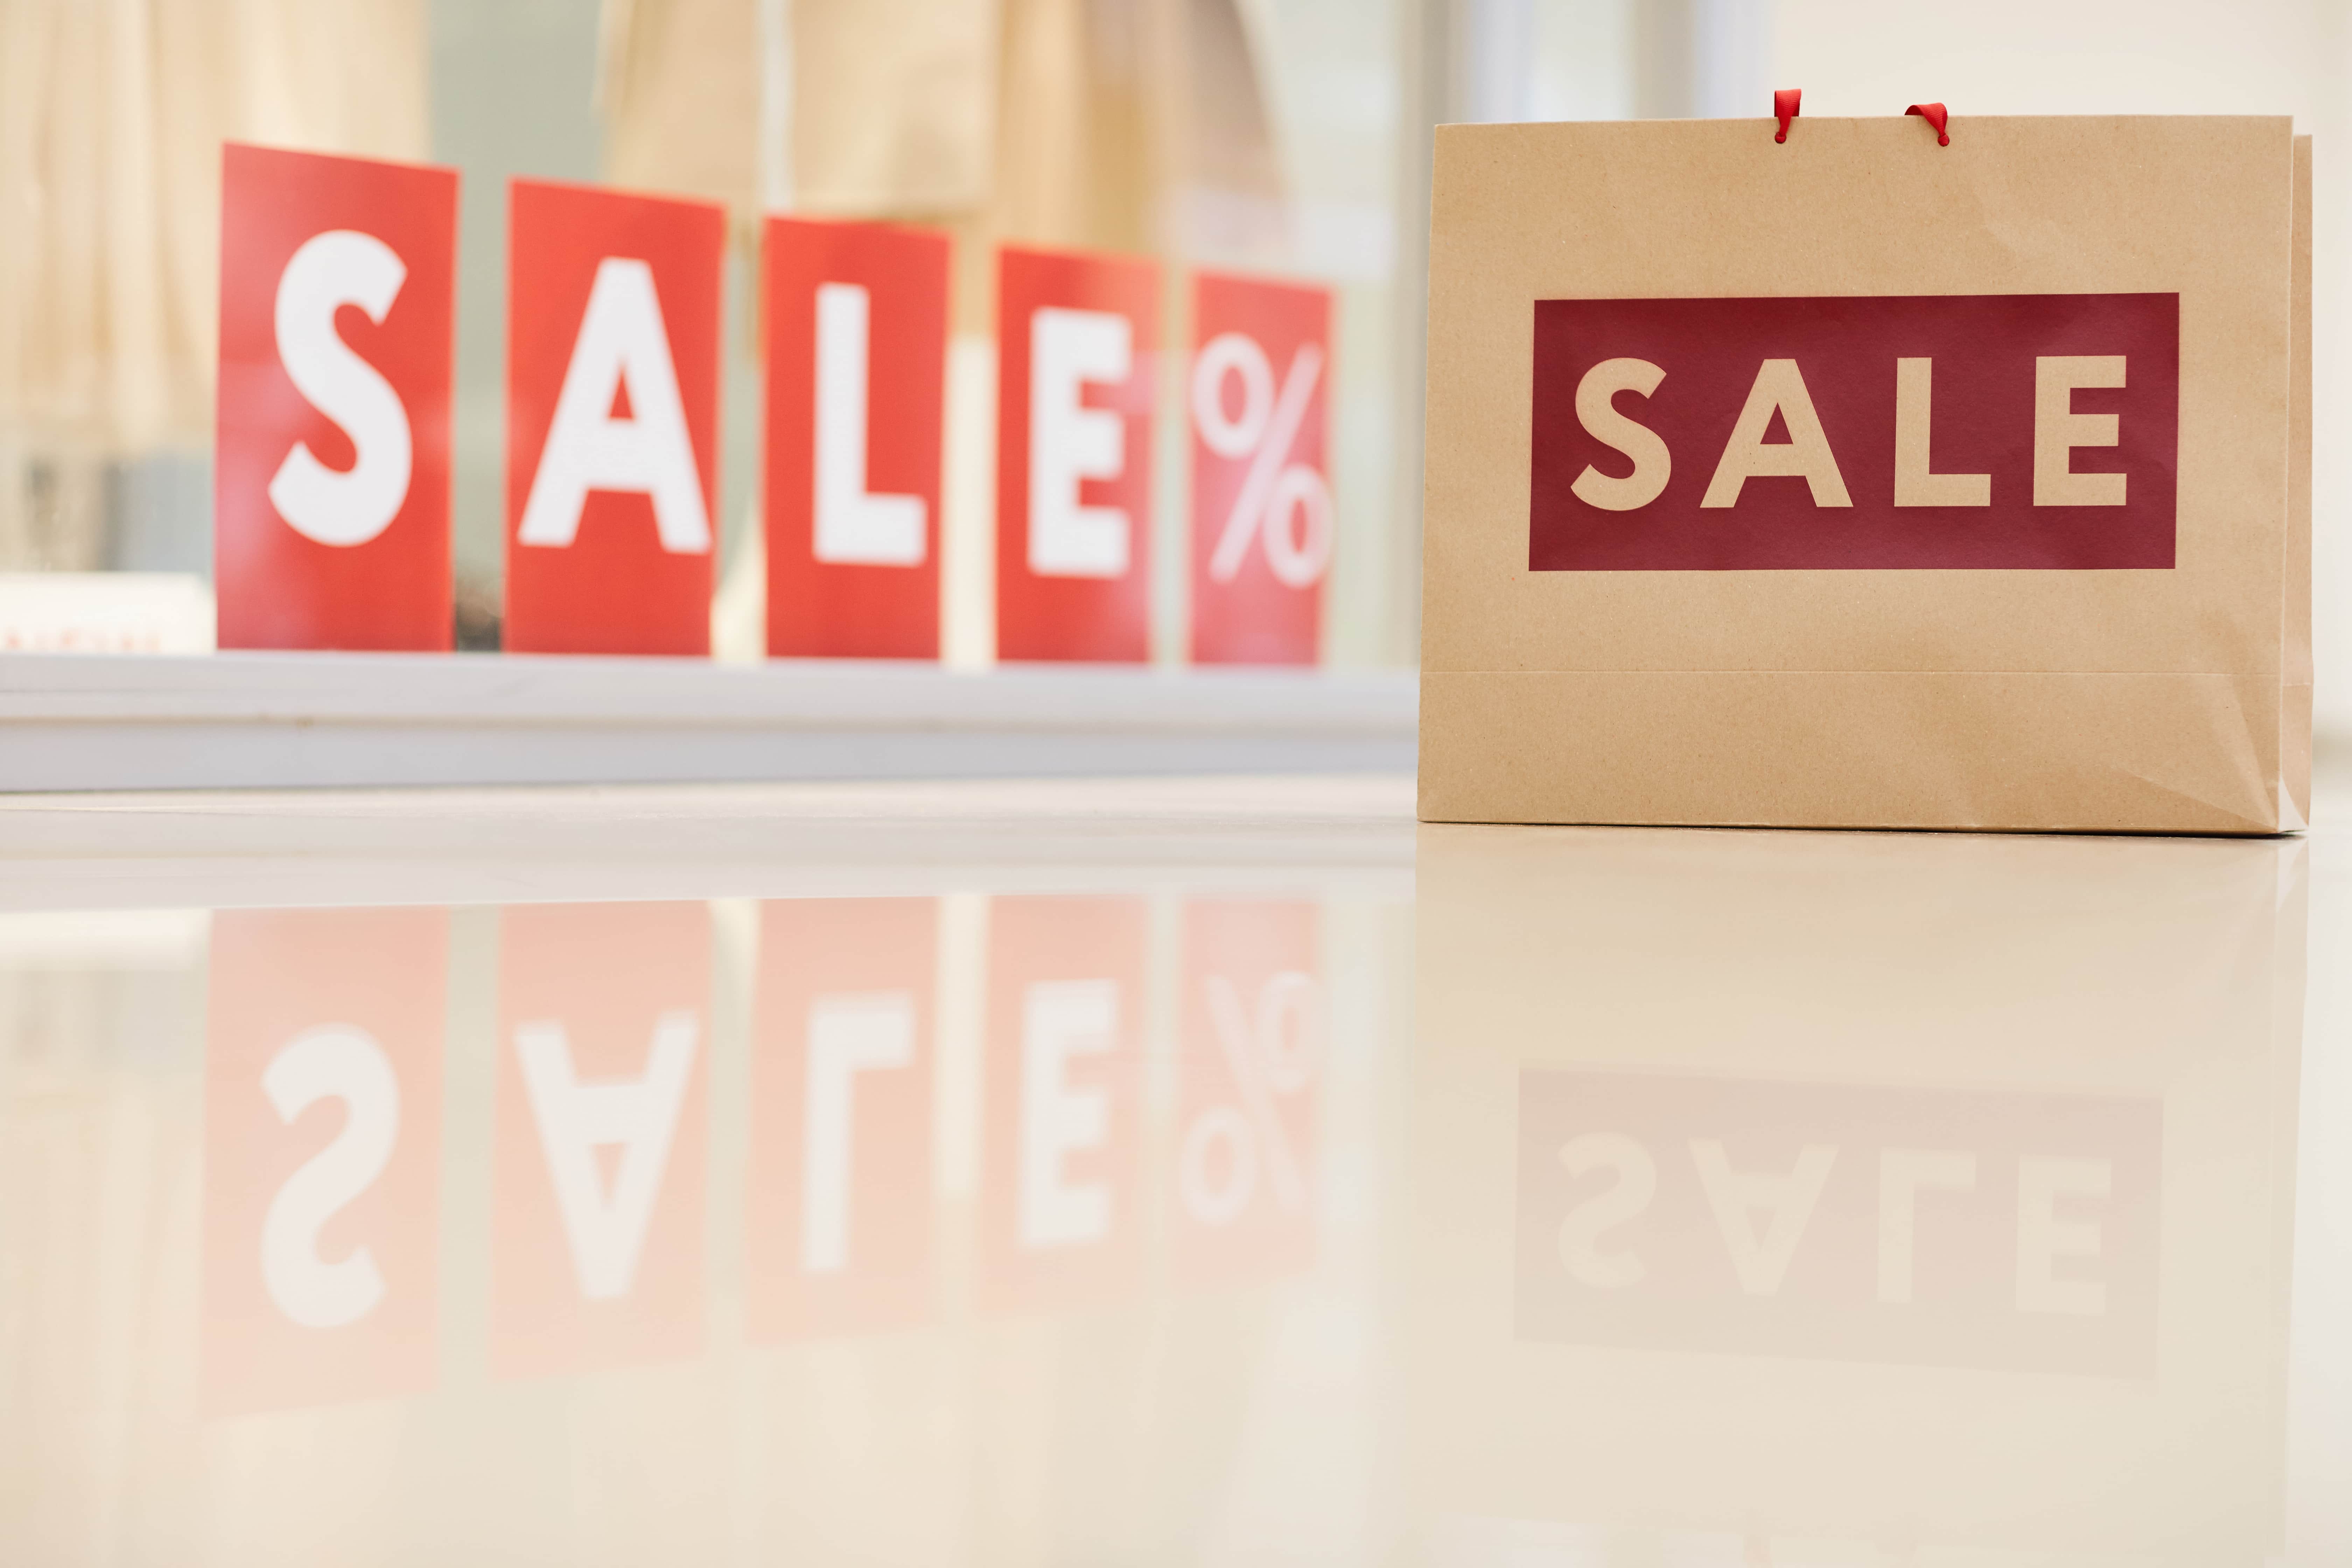 Boxing Day marketing tips, sale sign and sale bag.